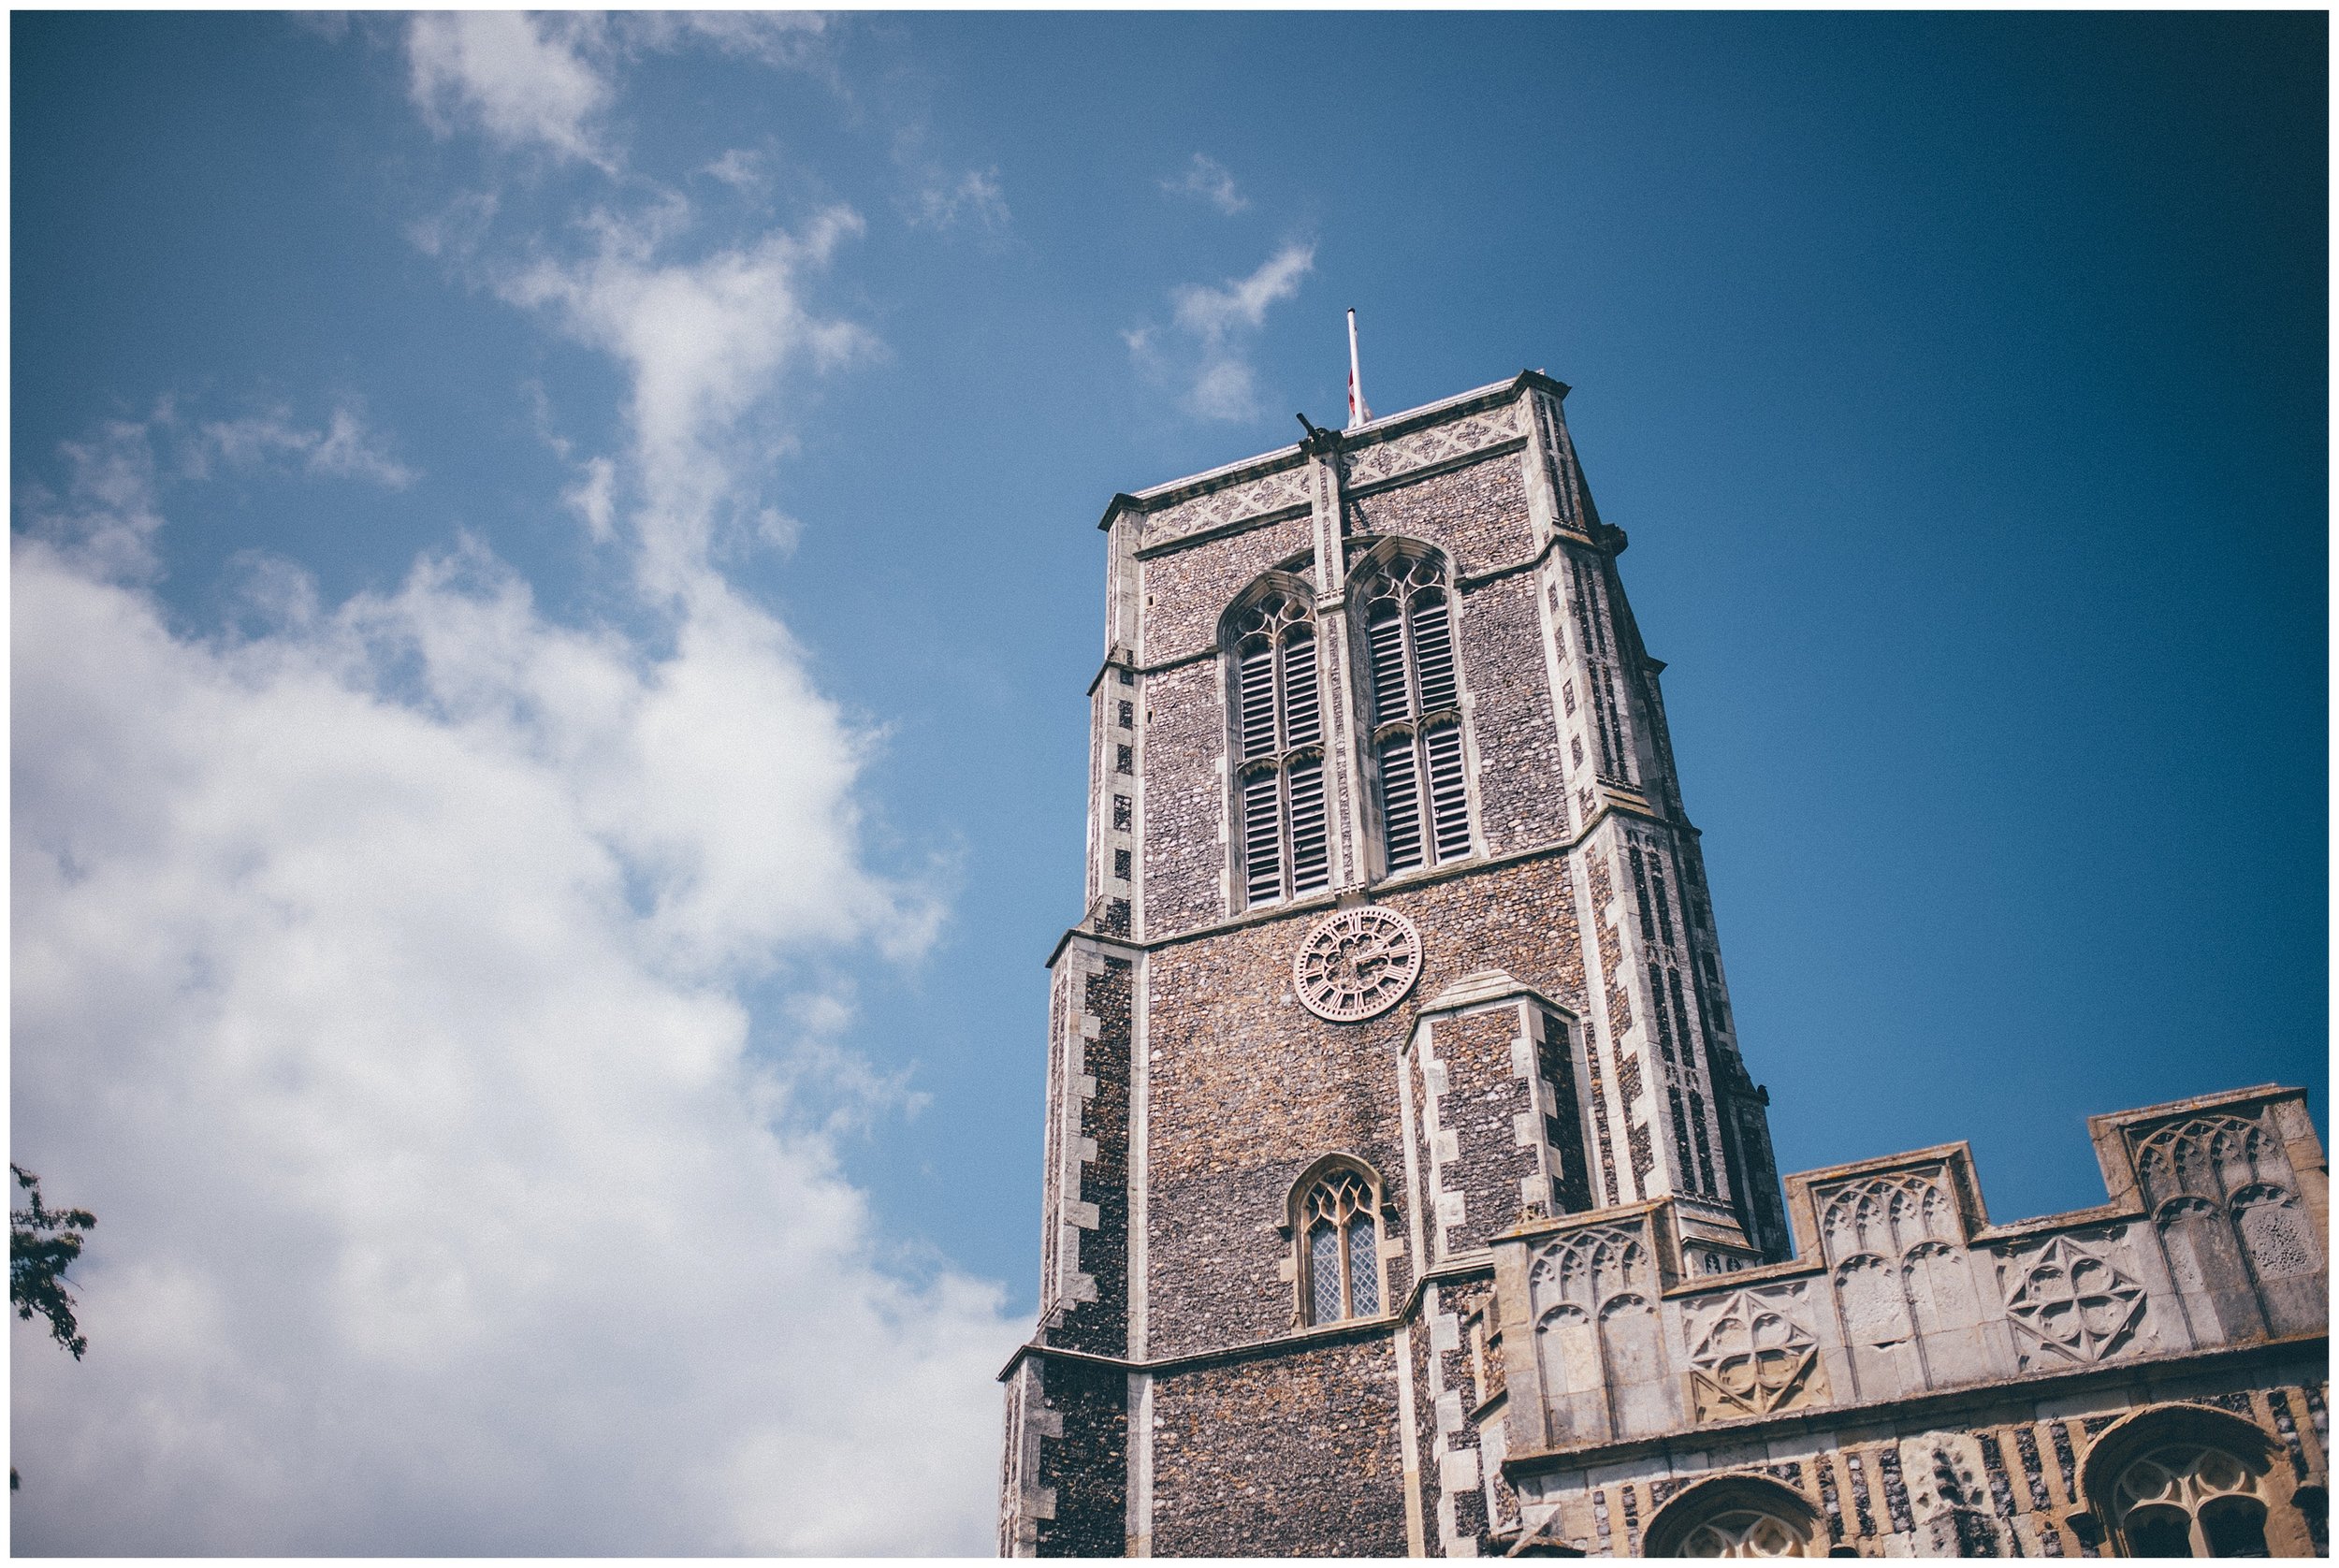 Wedding at St Edmunds Church in Southwold.